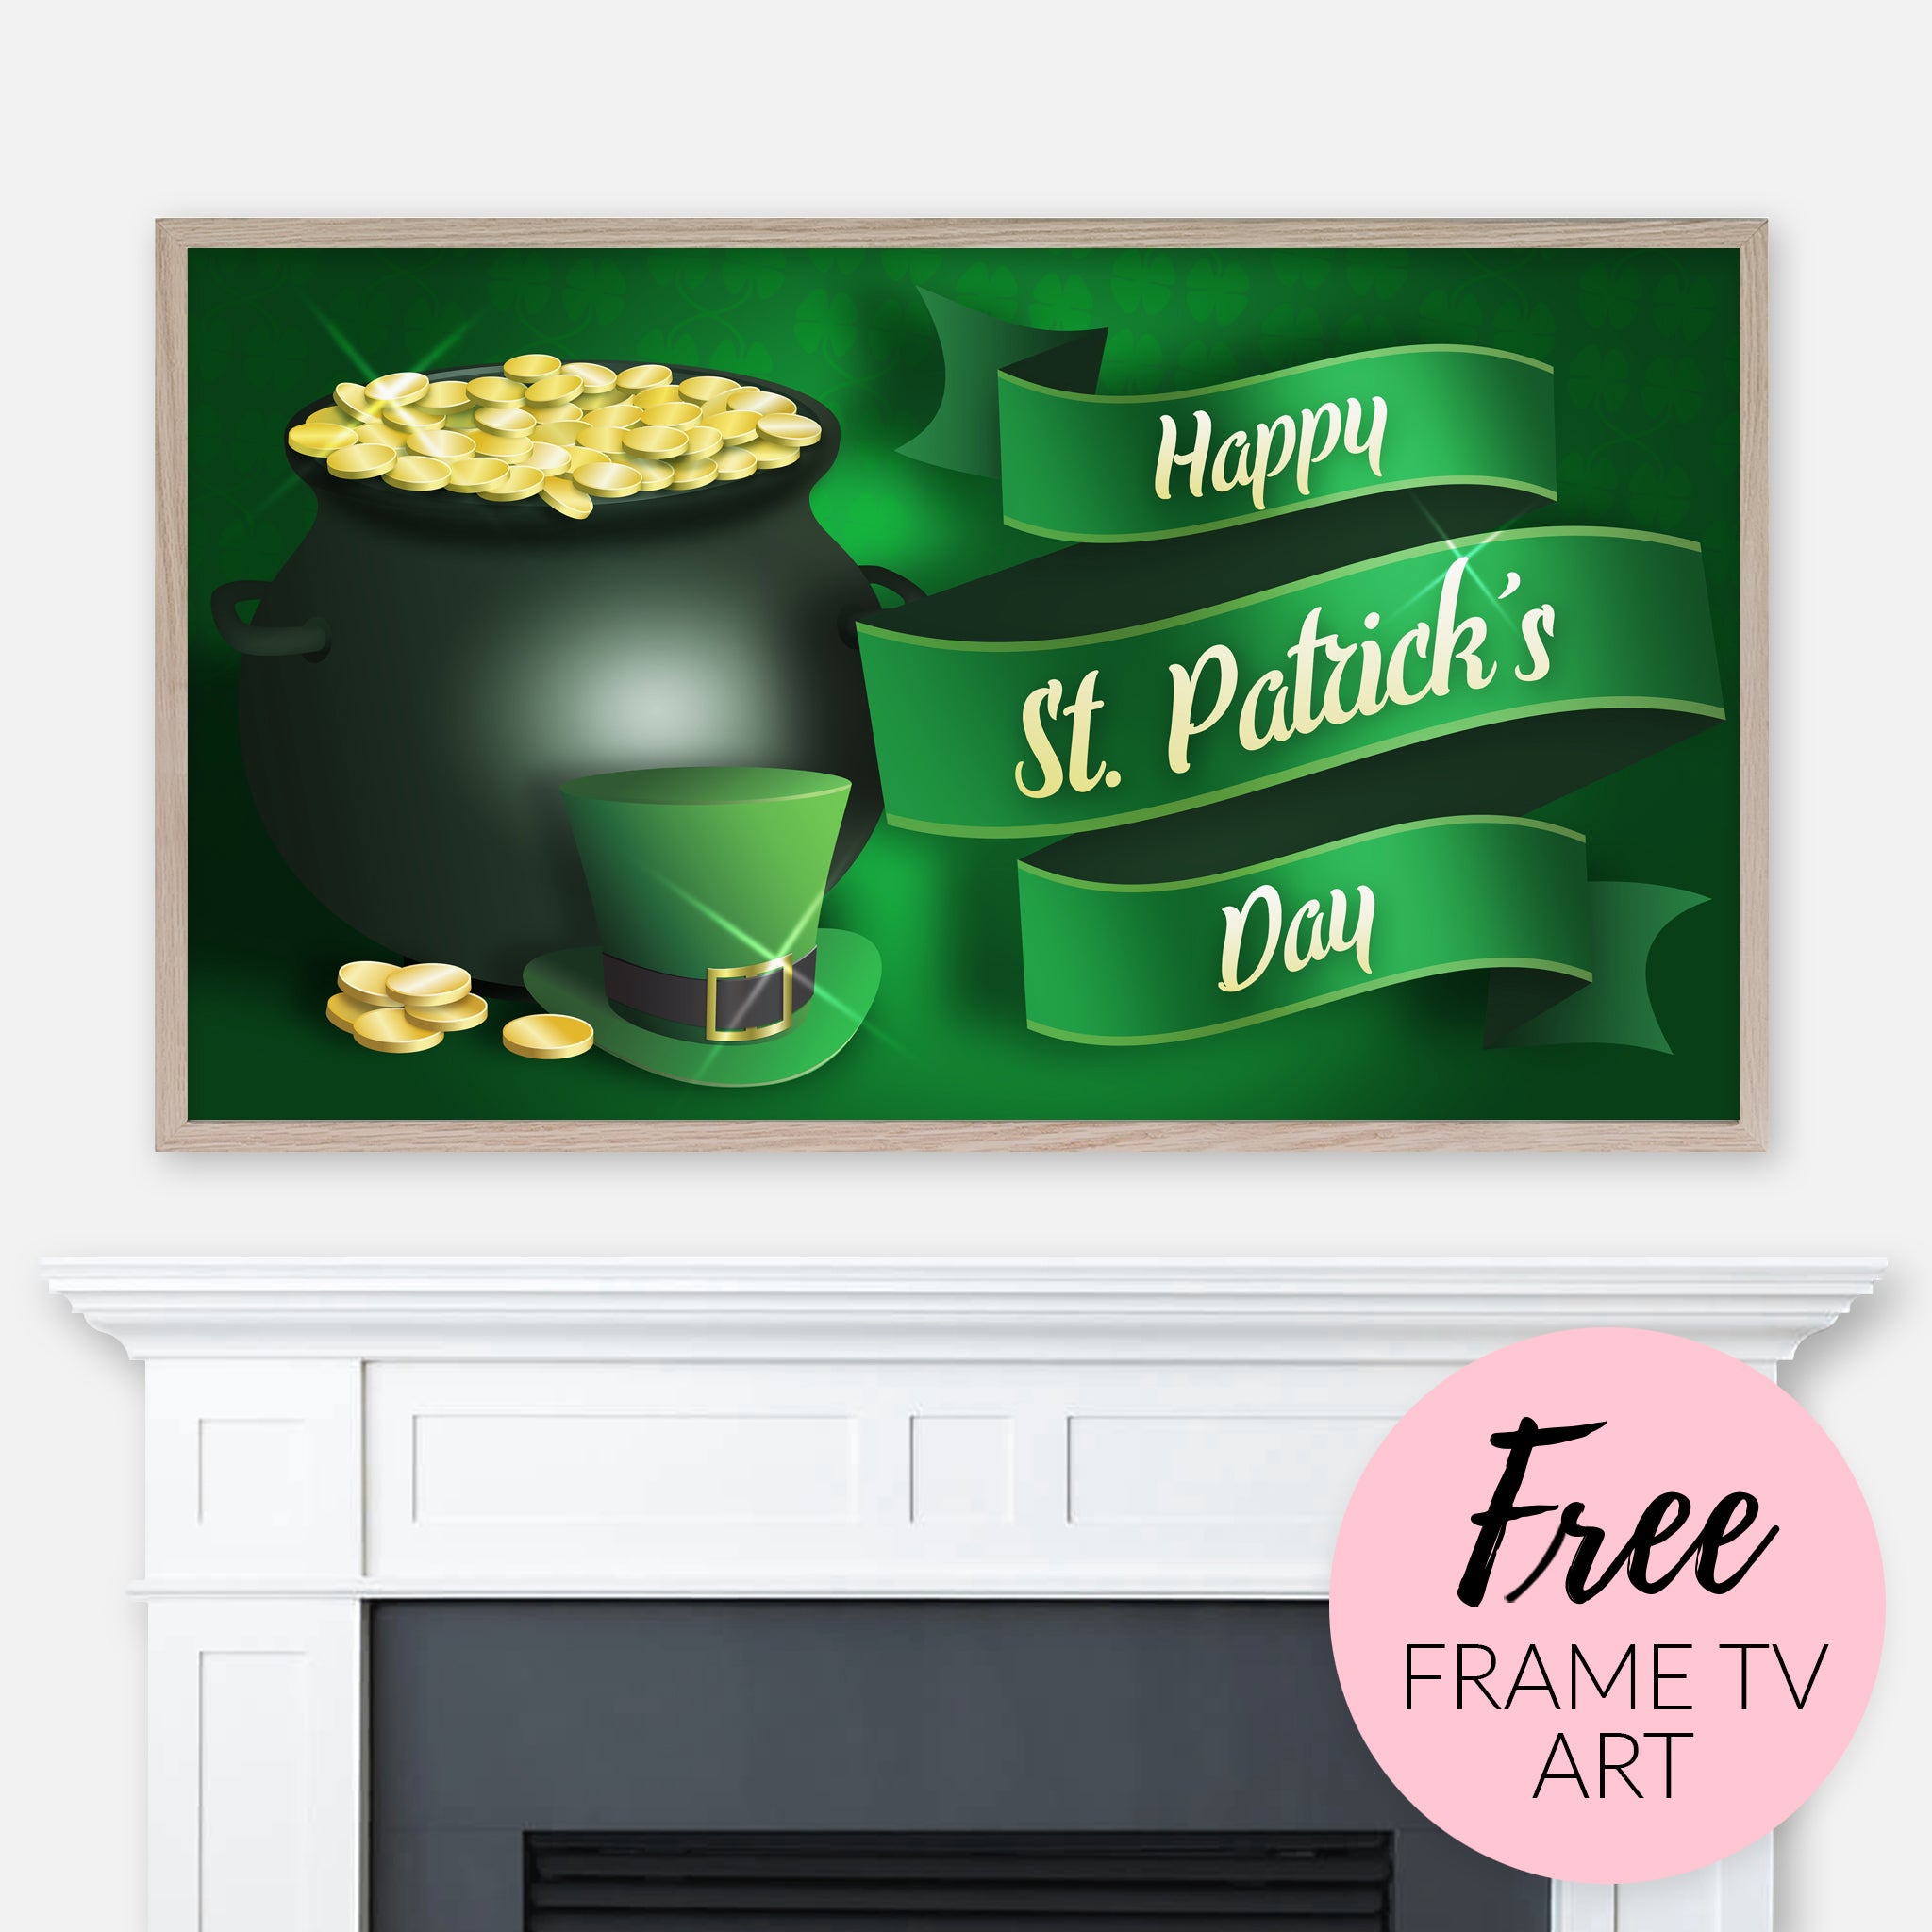 Free Saint Patrick's Day Samsung Frame TV Art Digital Download - Happy St. Patrick’s Day Banner - Pot of Gold and Green Hat